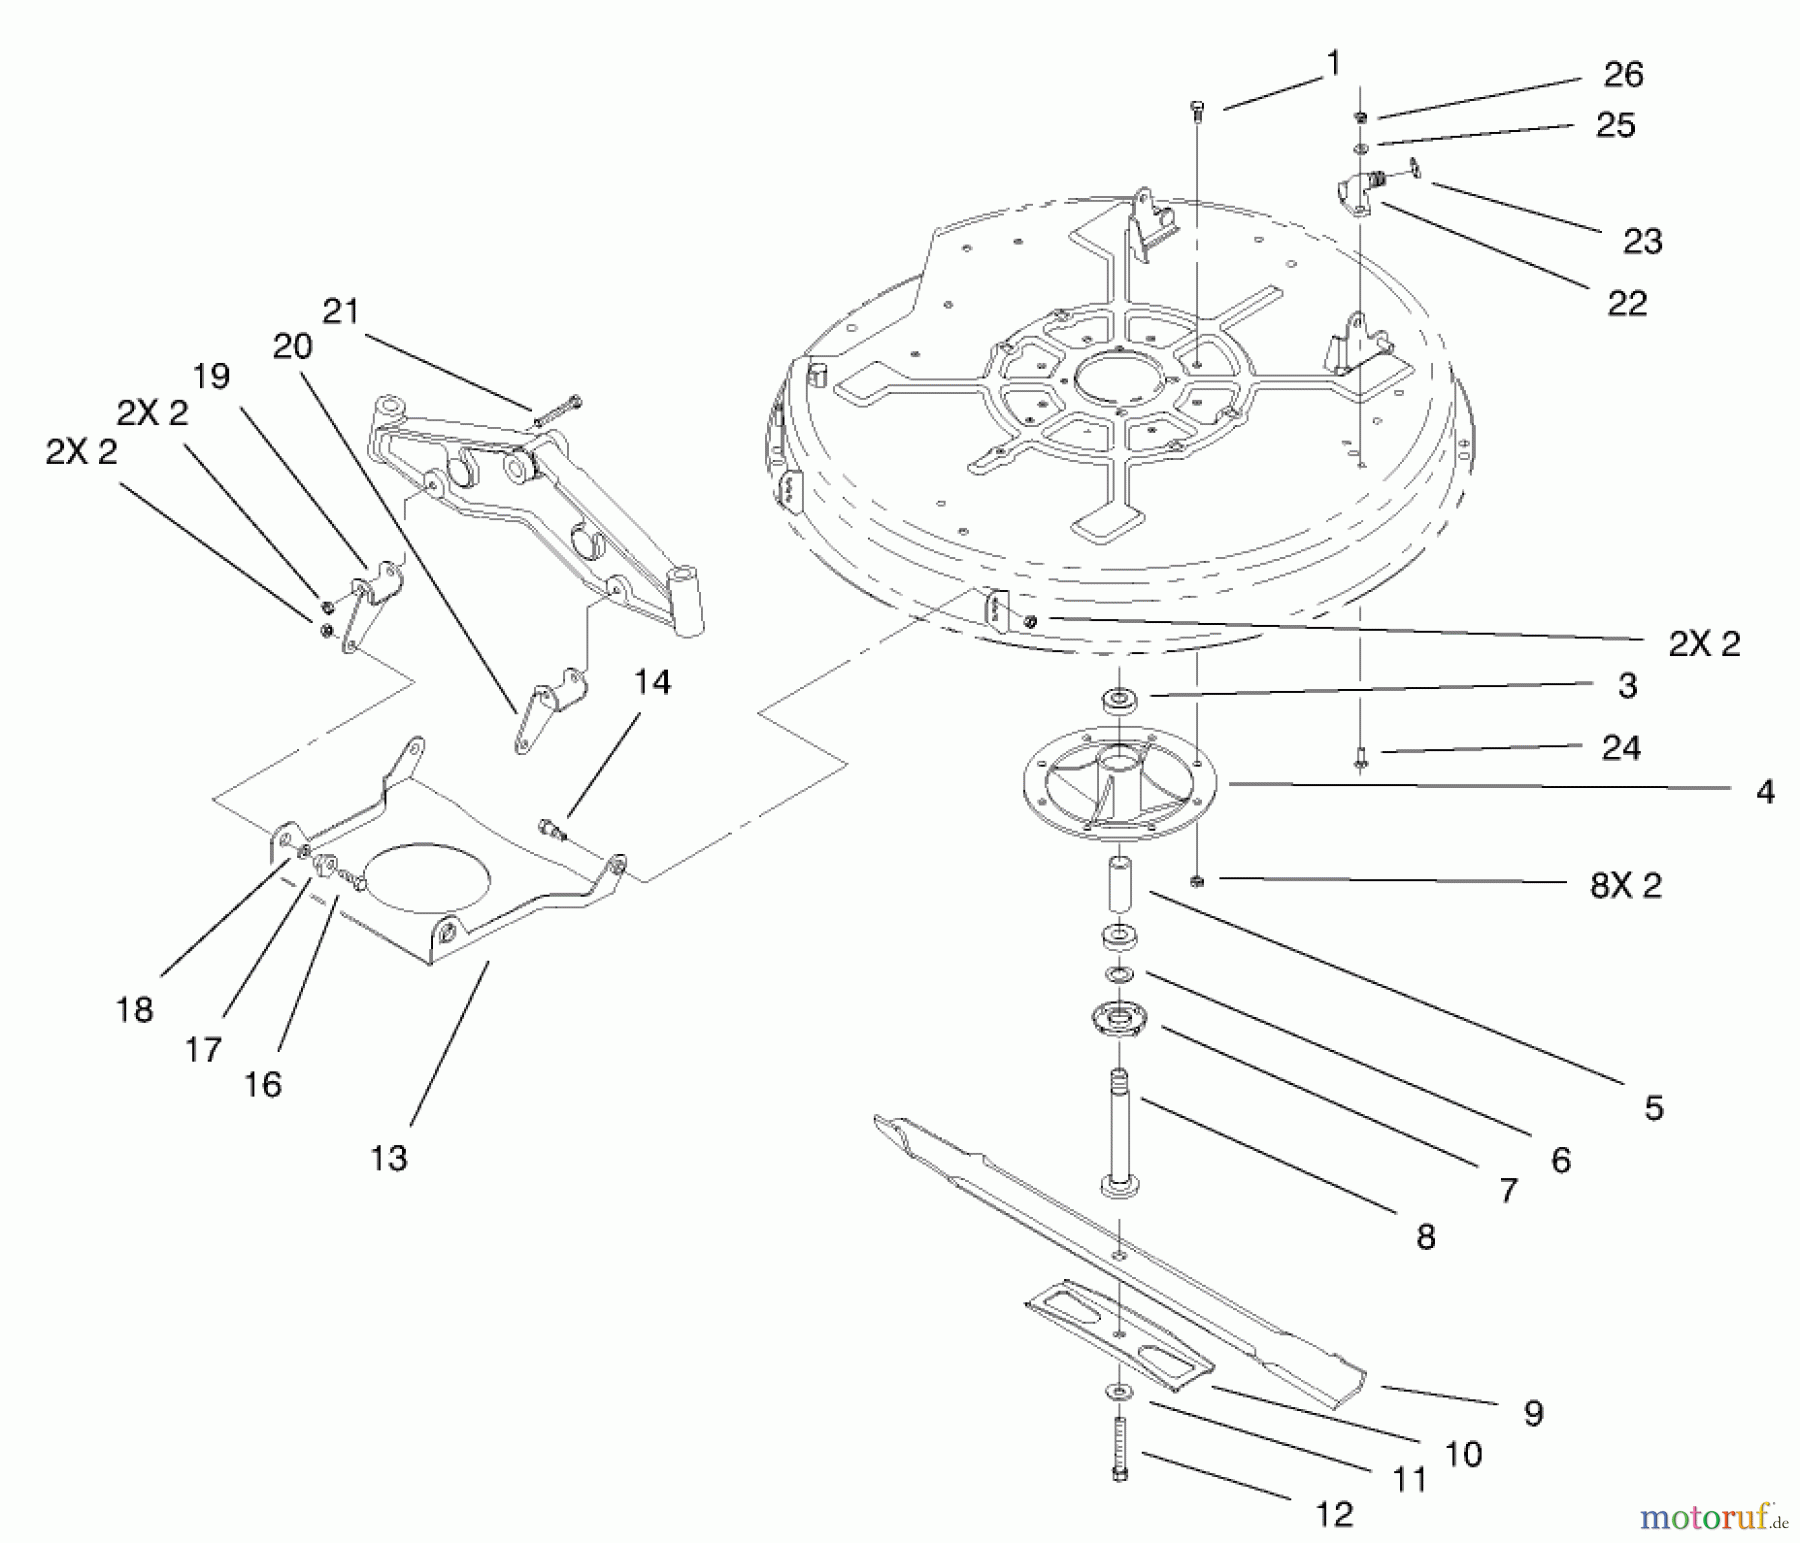  Toro Neu Mowers, Lawn & Garden Tractor Seite 1 71301 (12.5-32XLE) - Toro 12.5-32XLE Lawn Tractor, 2001 (210000001-210999999) DECK COMPONENTS ASSEMBLY